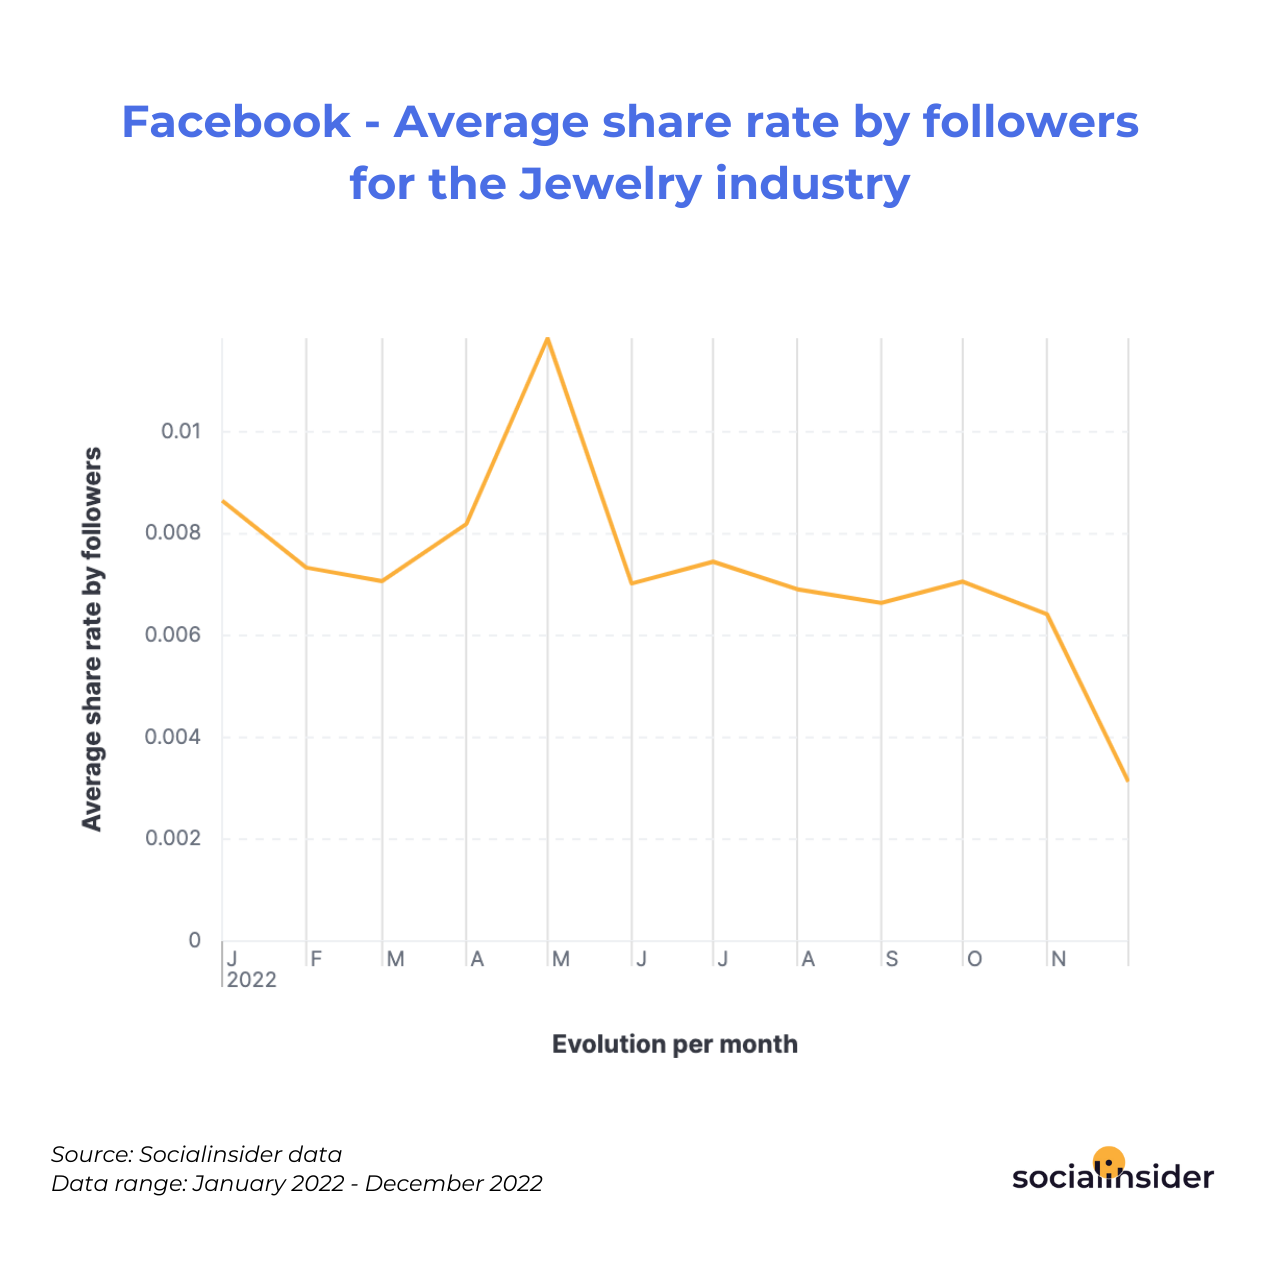 Facebook - Average share rate by followers for the Jewelry industry 